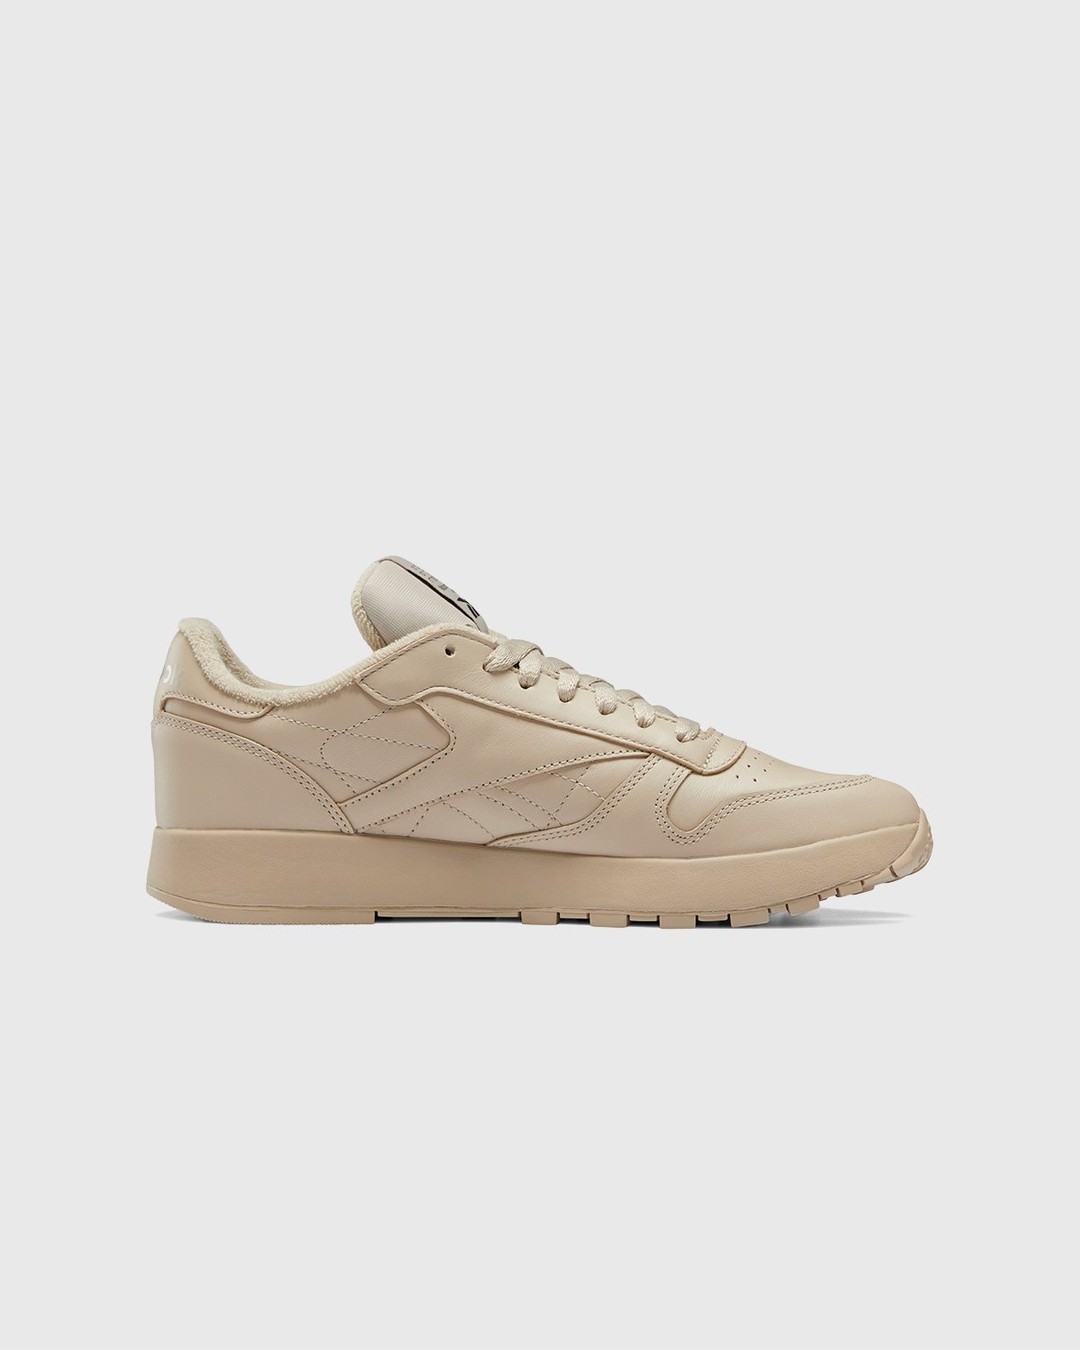 Maison Margiela x Reebok – Classic Leather Tabi Natural - Low Top Sneakers - Beige - Image 5